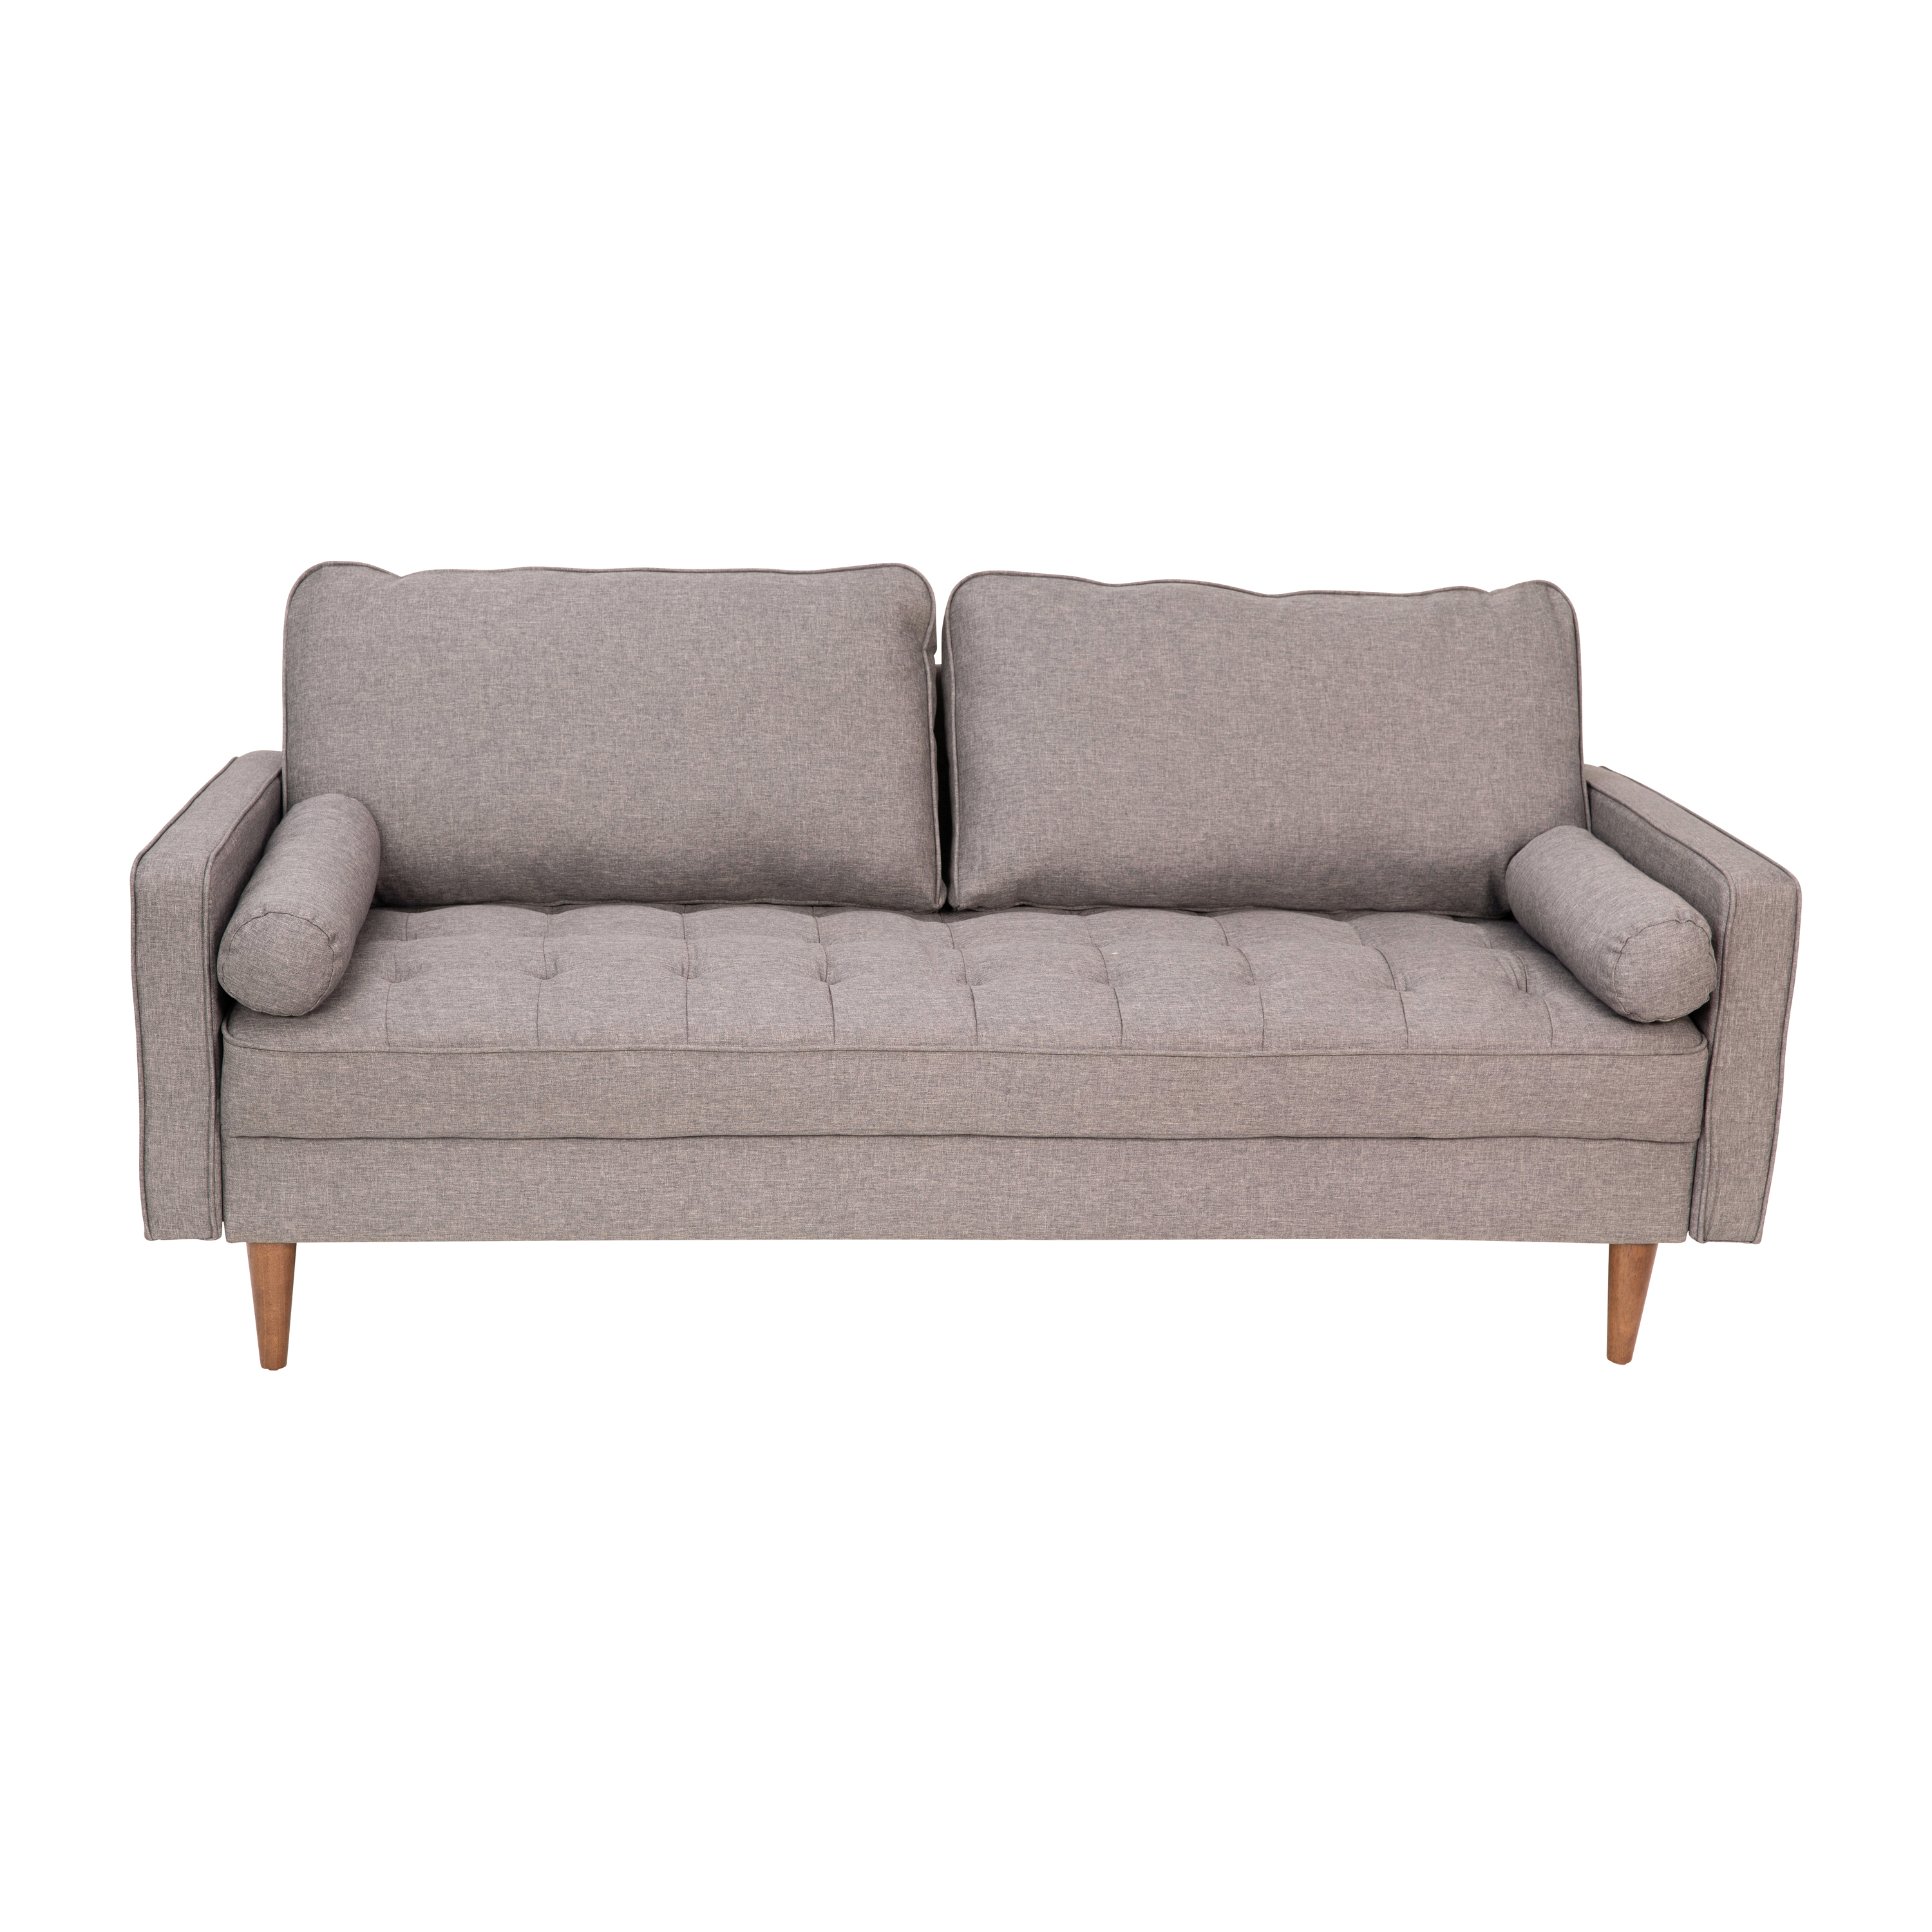 Flash Furniture IS-PS100-GY-GG Mid-Century Modern Slate Gray Tufted Faux Linen Sofa with Wood Legs